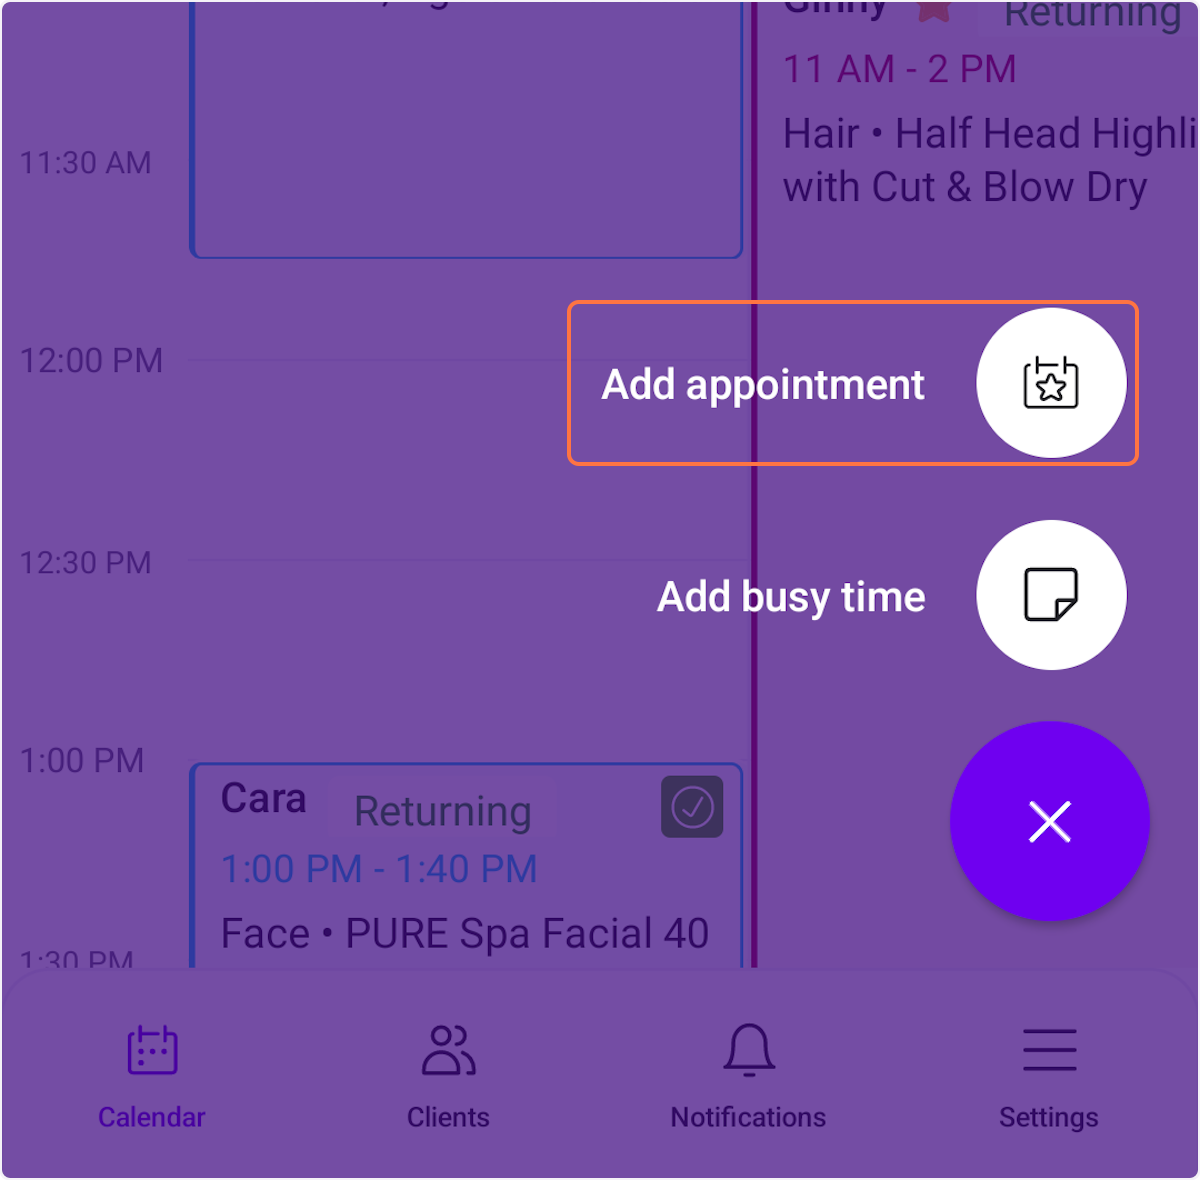 Tap the "Add appointment" button.